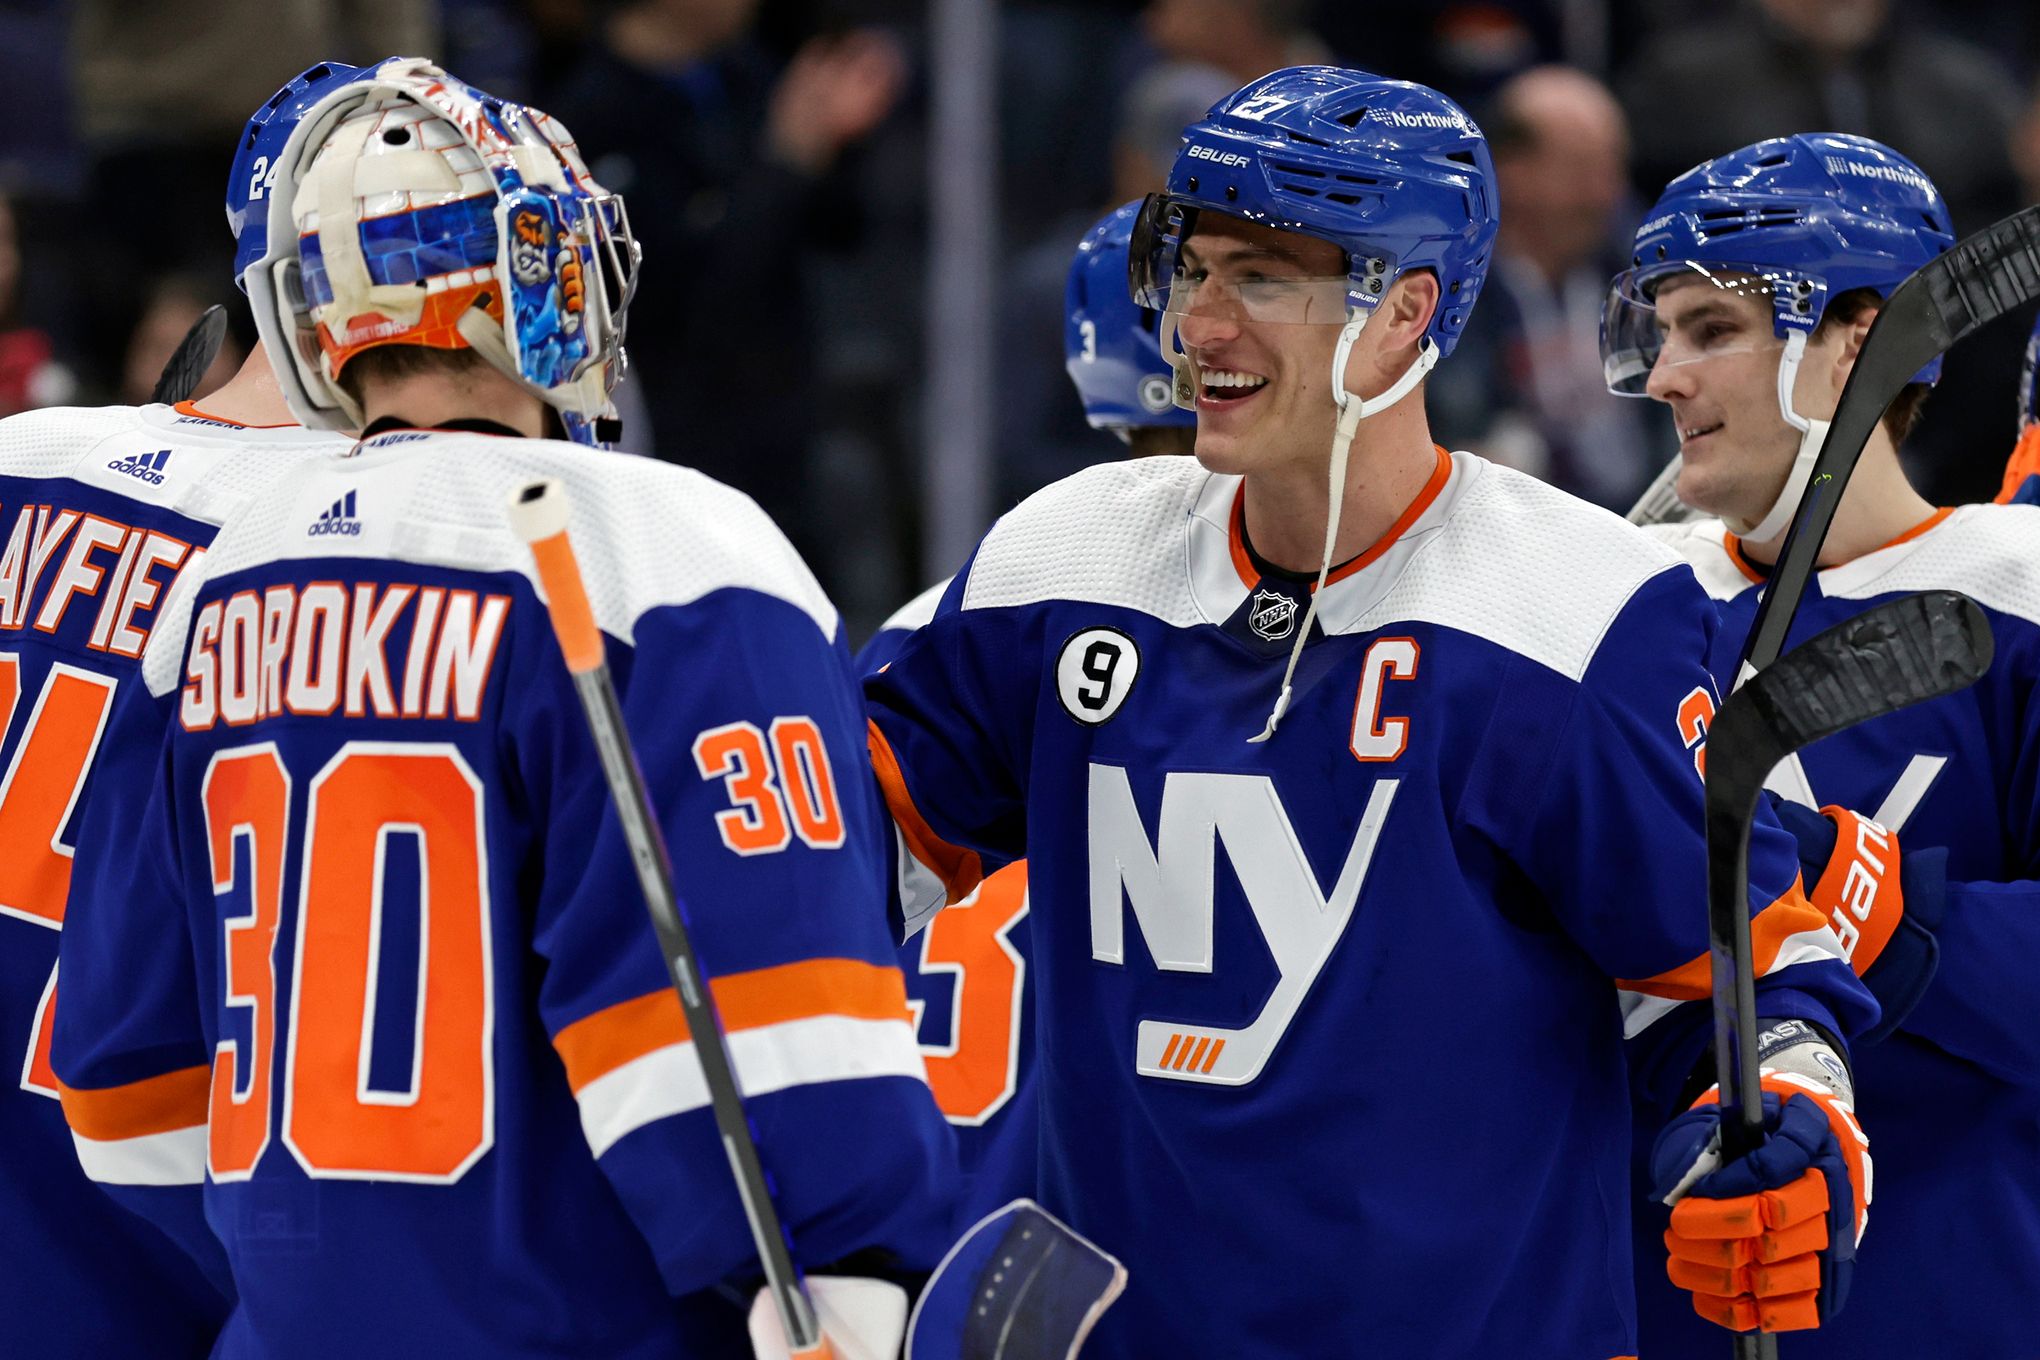 Forward's Hat Trick Propels Islanders Over Blue Jackets - The New